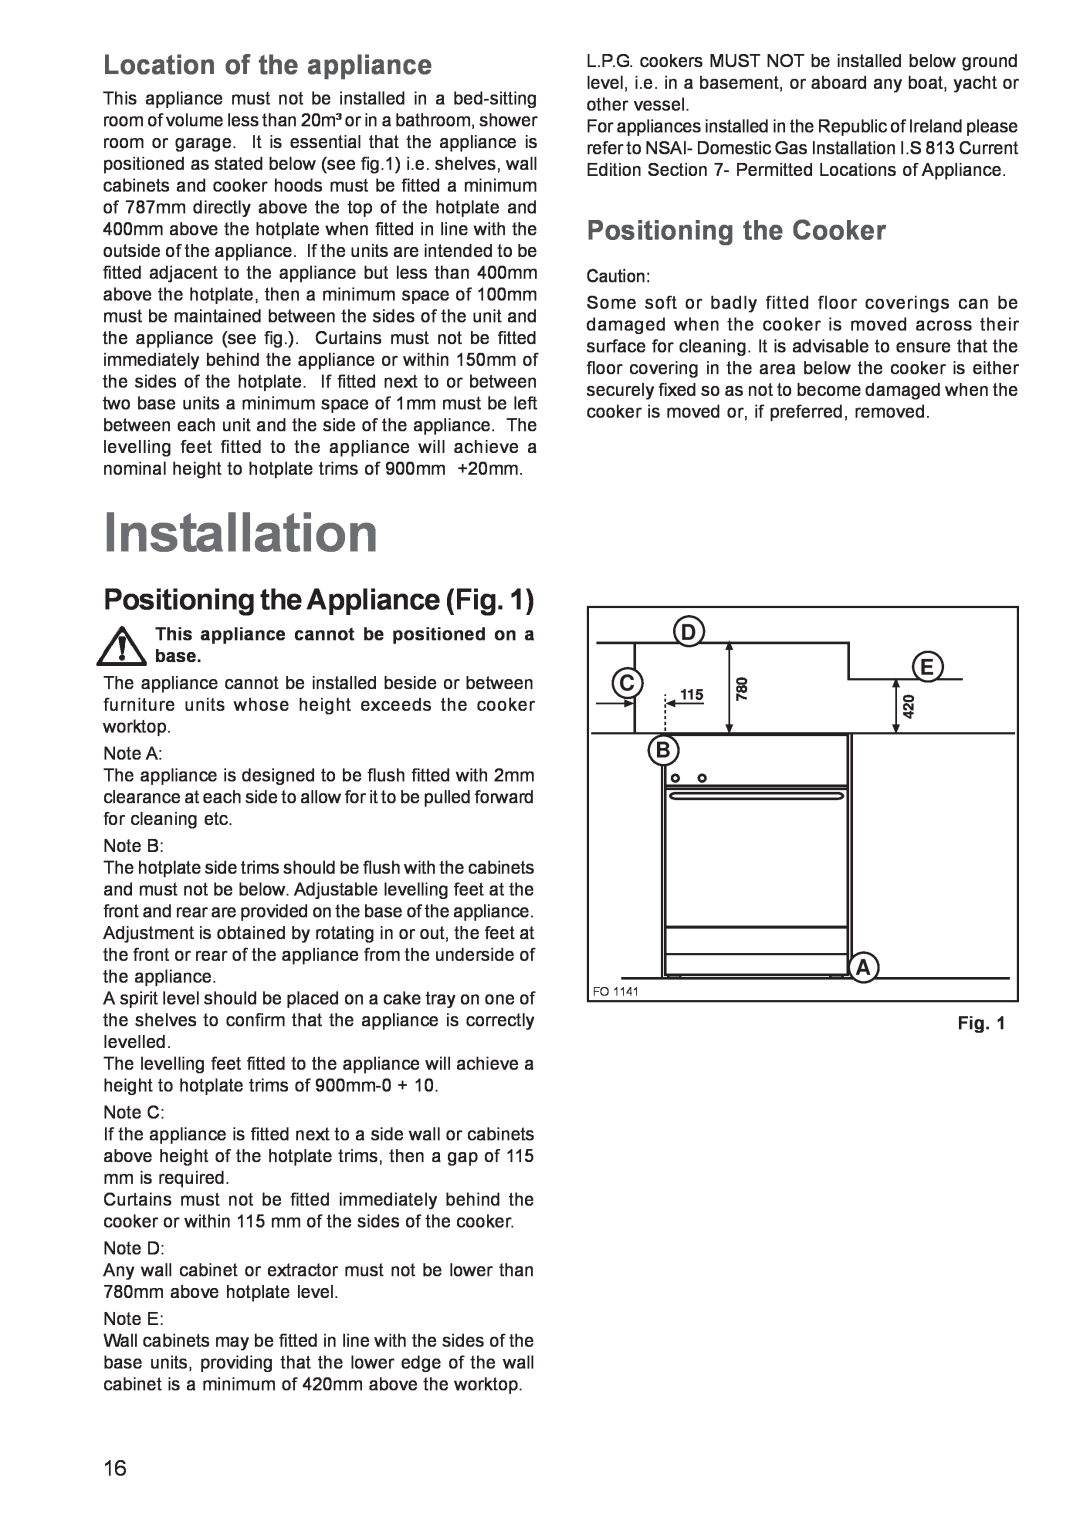 Zanussi ZCM 640 ZCM 641 Installation, Positioning the Appliance Fig, Location of the appliance, Positioning the Cooker 